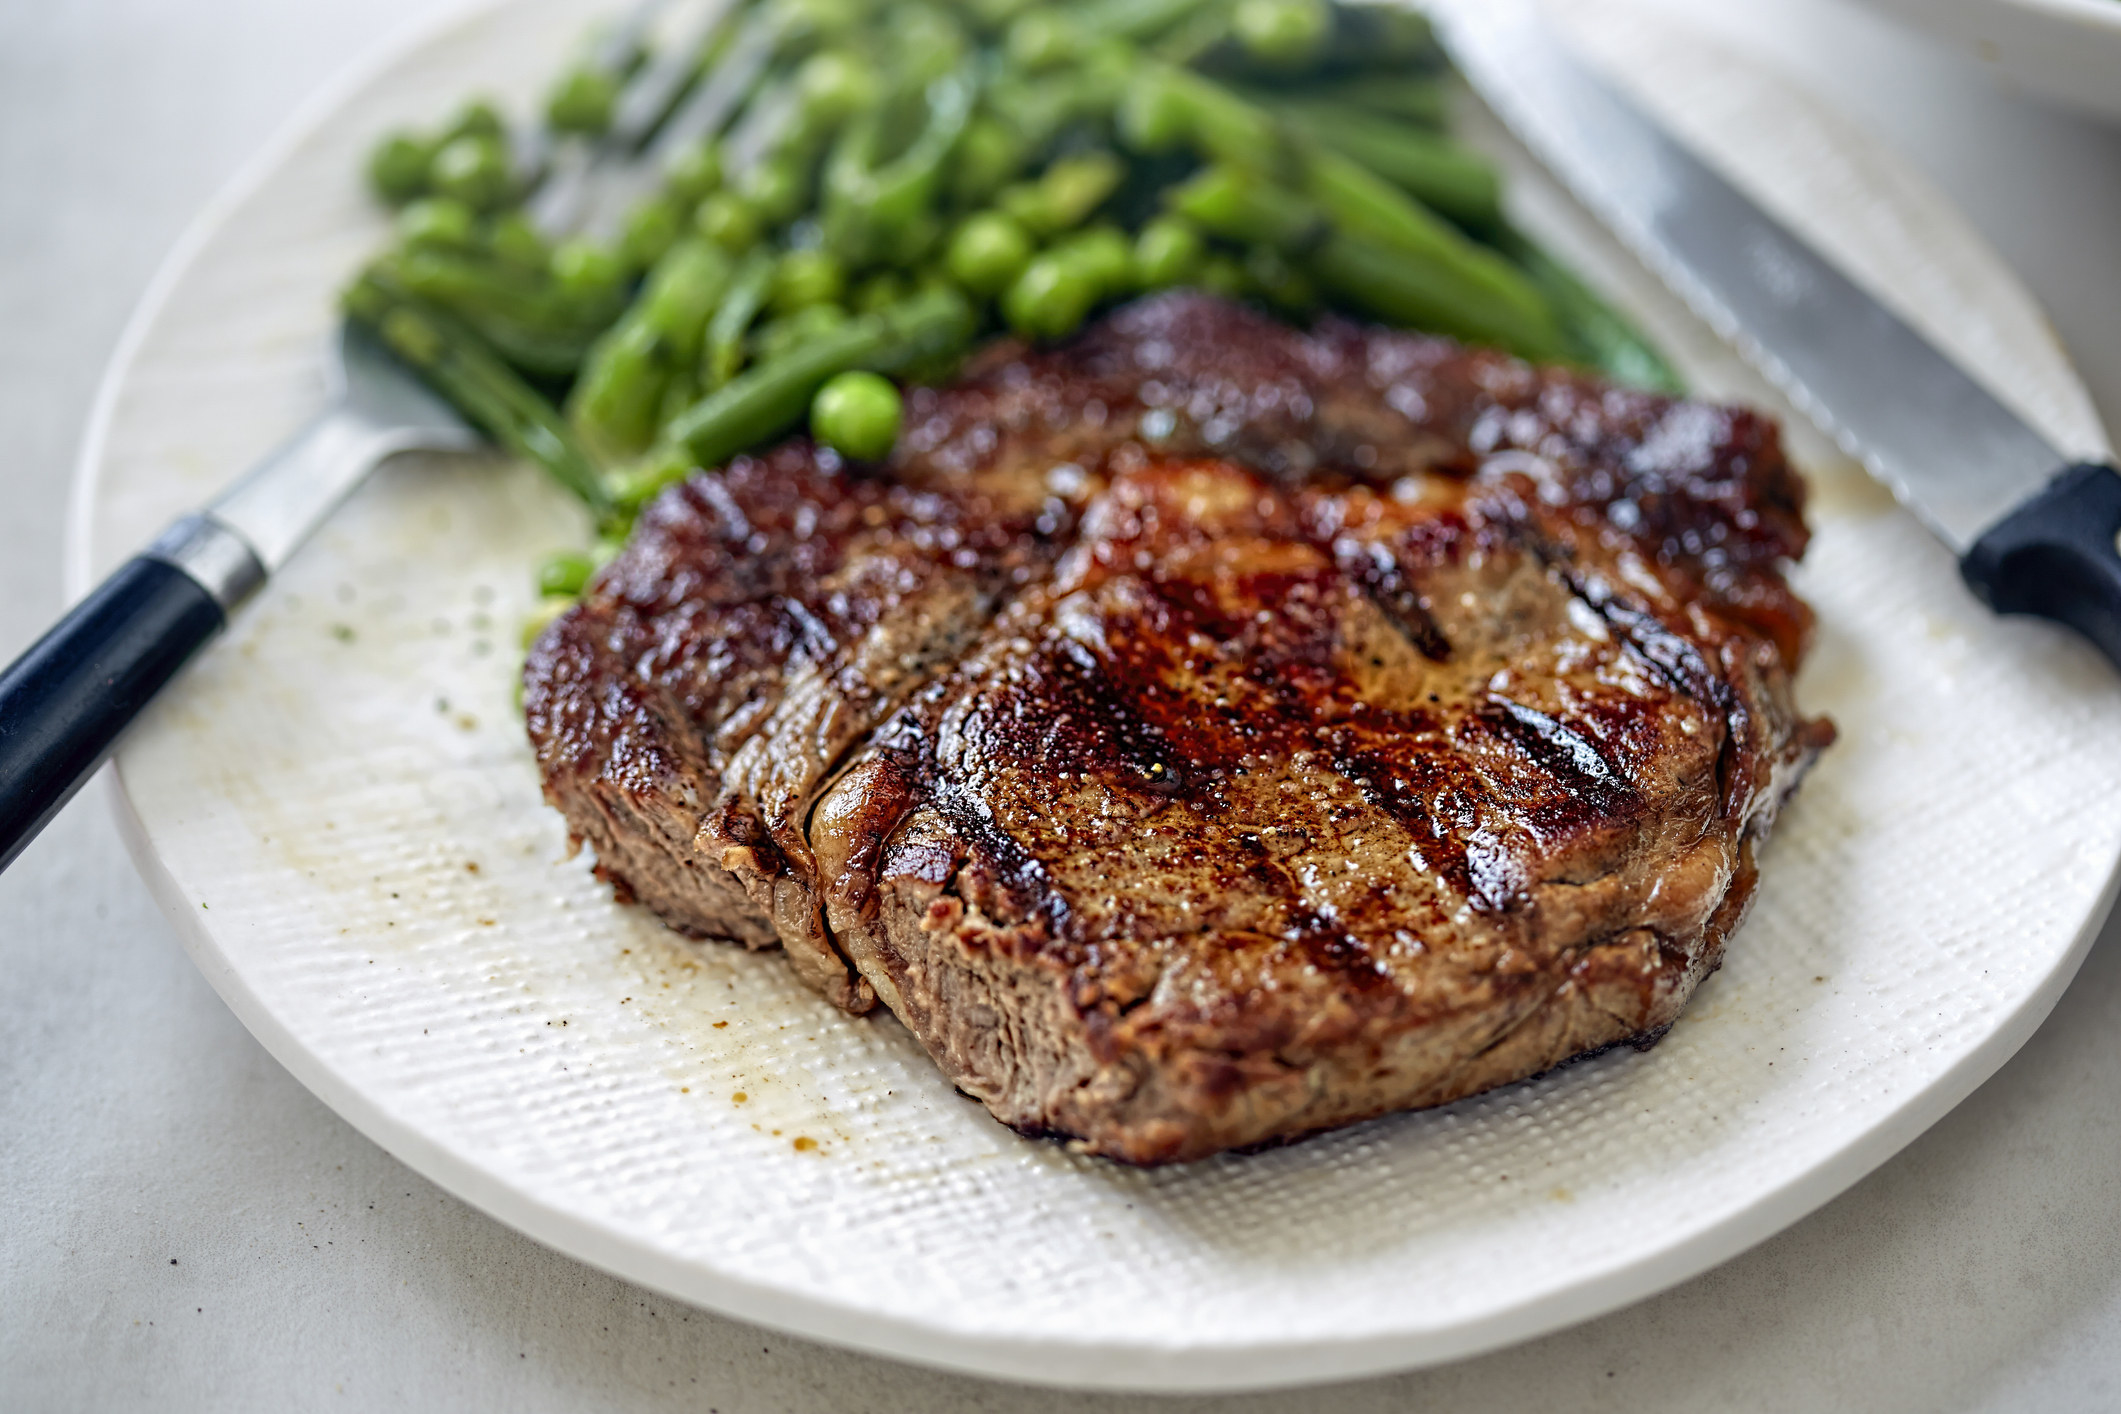 Grilled steak with green vegetables